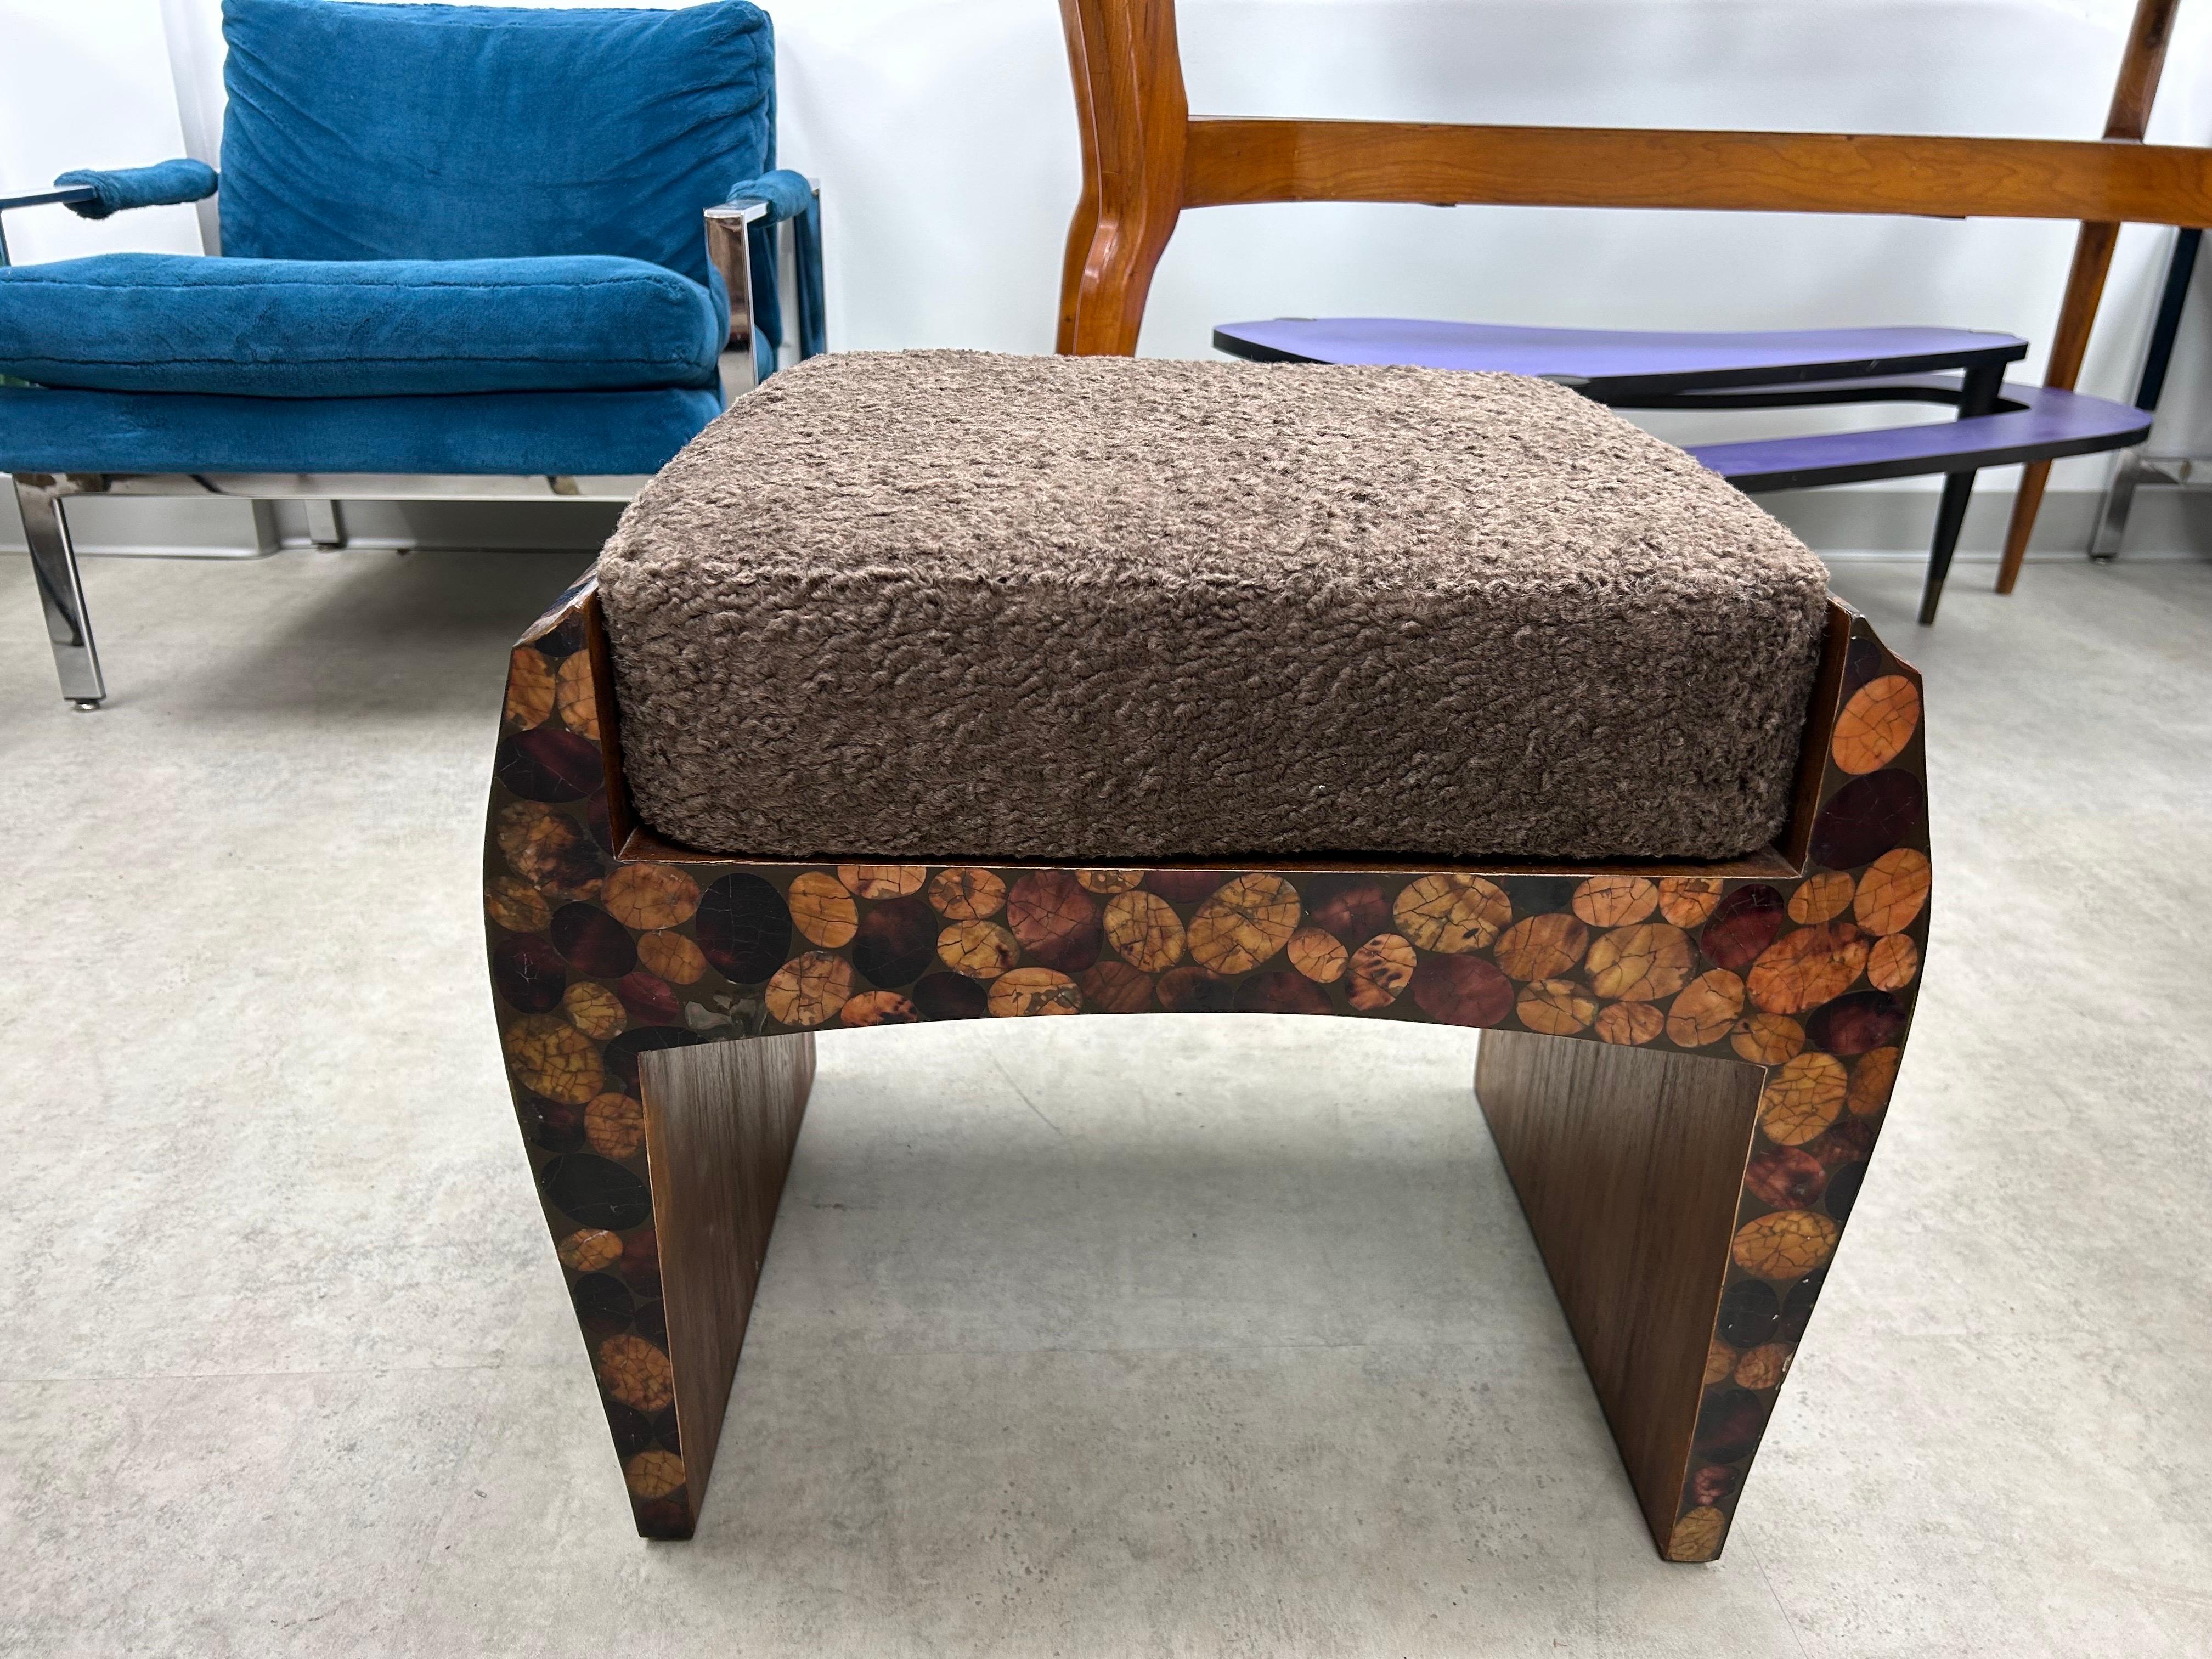 French Organic Modern Bench By R & Y Augousti.
This handsome French lacquered wood bench has the appearance of tortoise shell.
Perfect for extra seating where needed. Newly upholstered in a high end neutral lambs wood type fabric. Appropriate makers